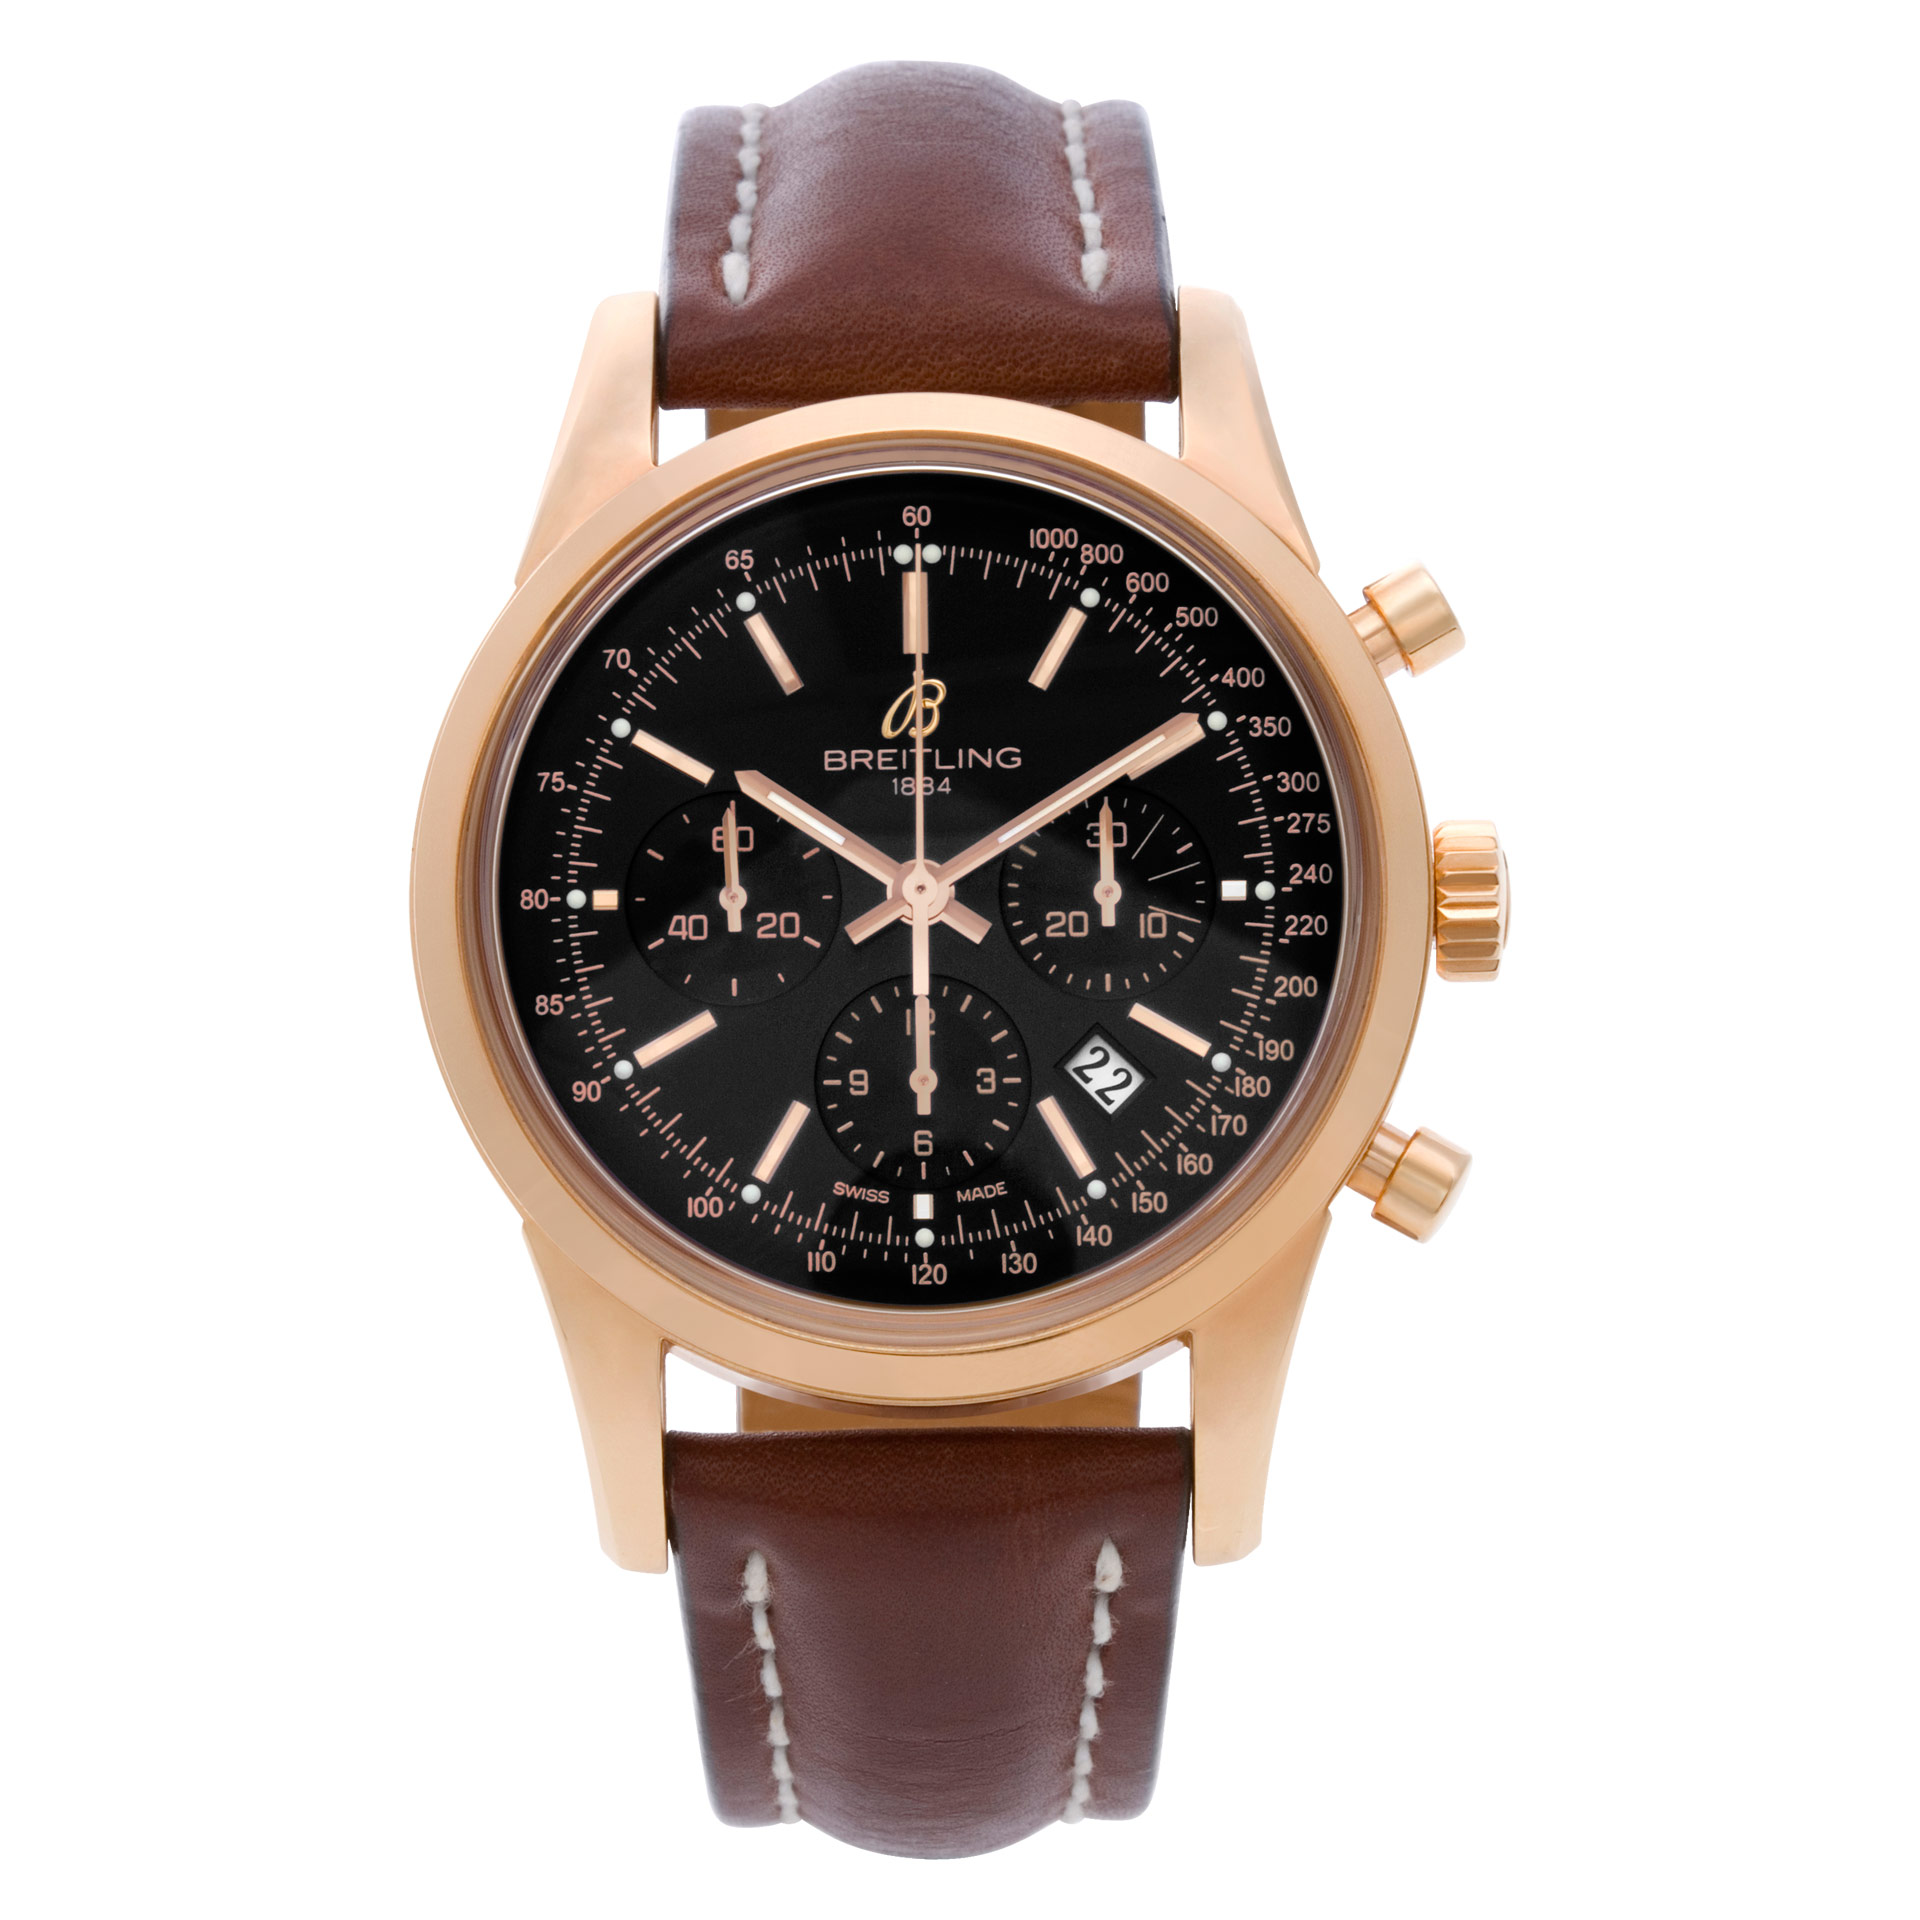 Unused Breitling Transocean Chronograph 43mm RB0152 image 1